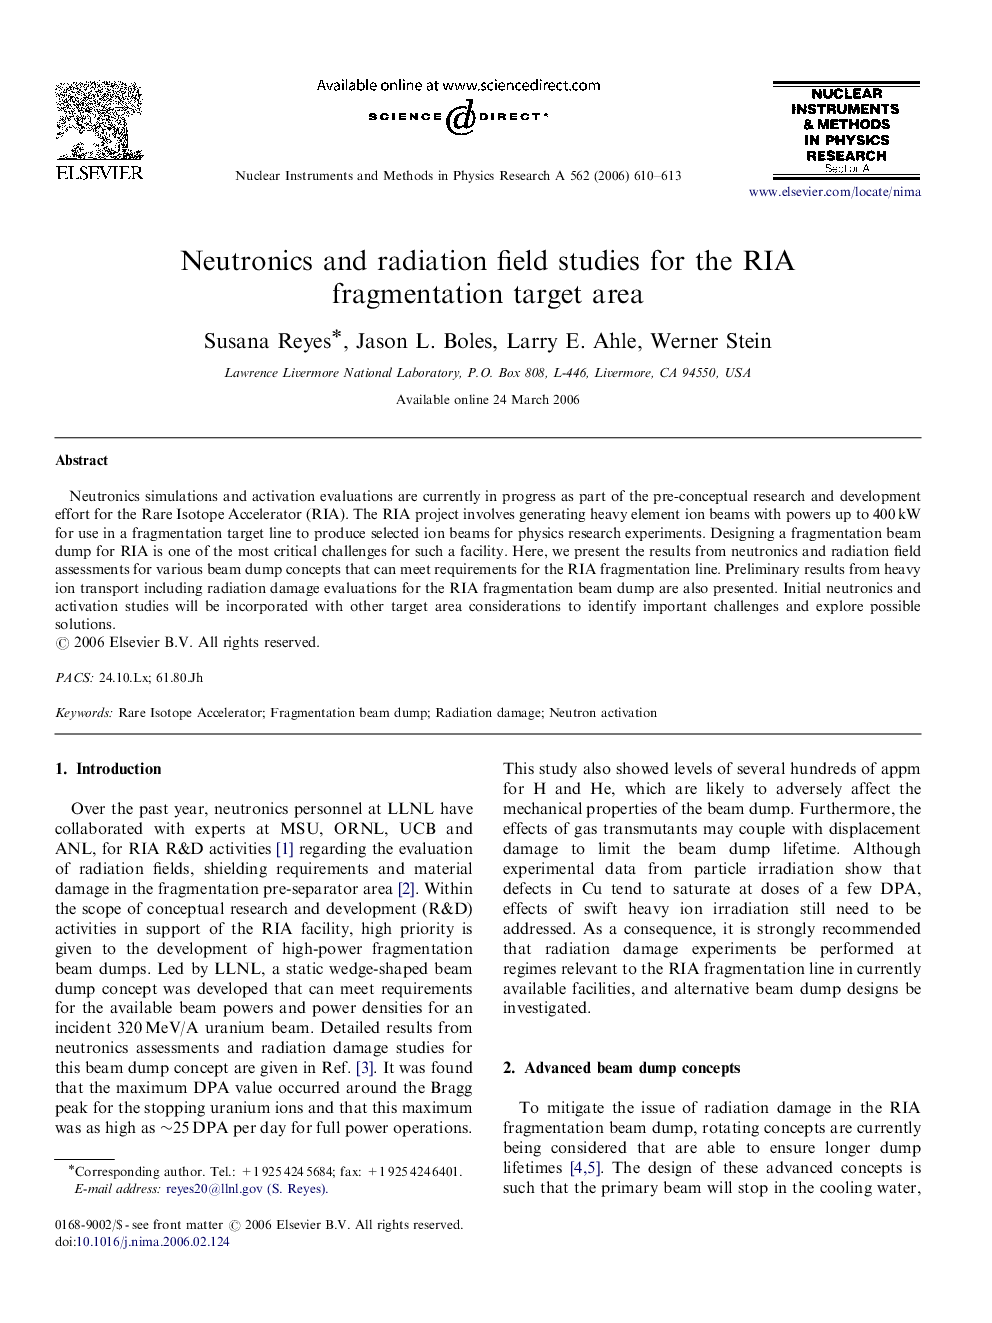 Neutronics and radiation field studies for the RIA fragmentation target area